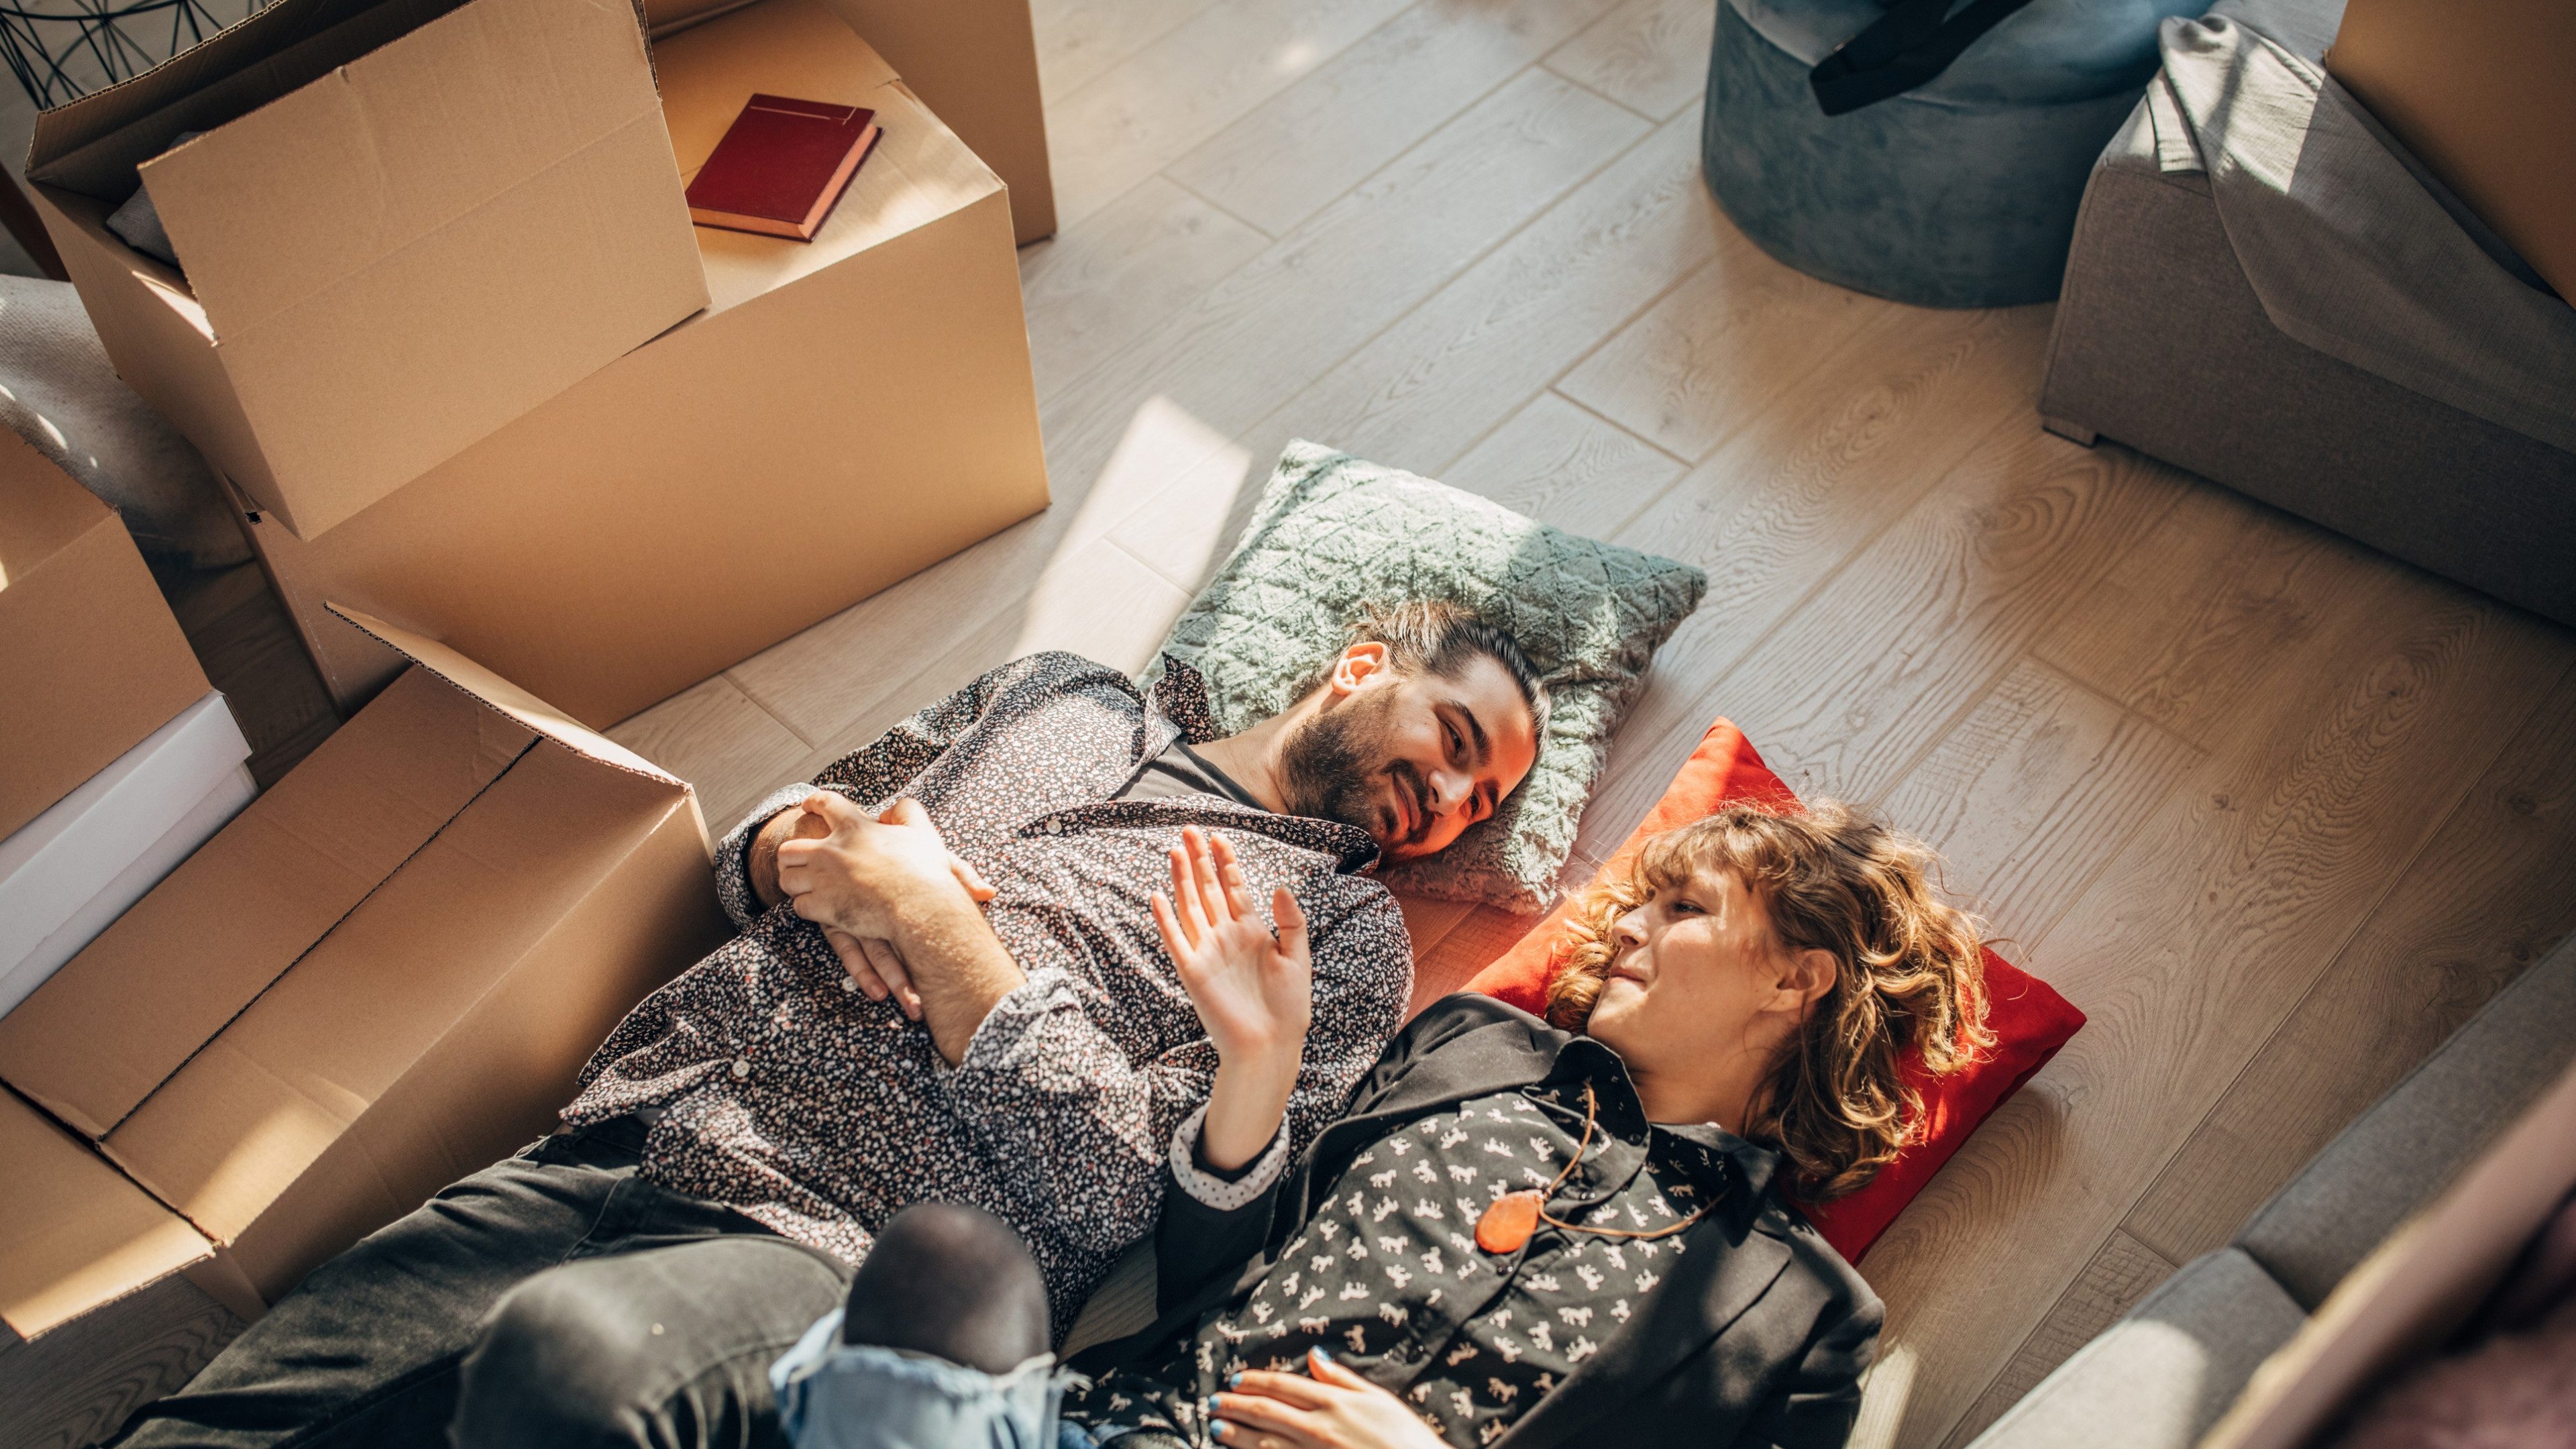 Man and woman, young couple moving into their new apartment together, lying on the floor together.